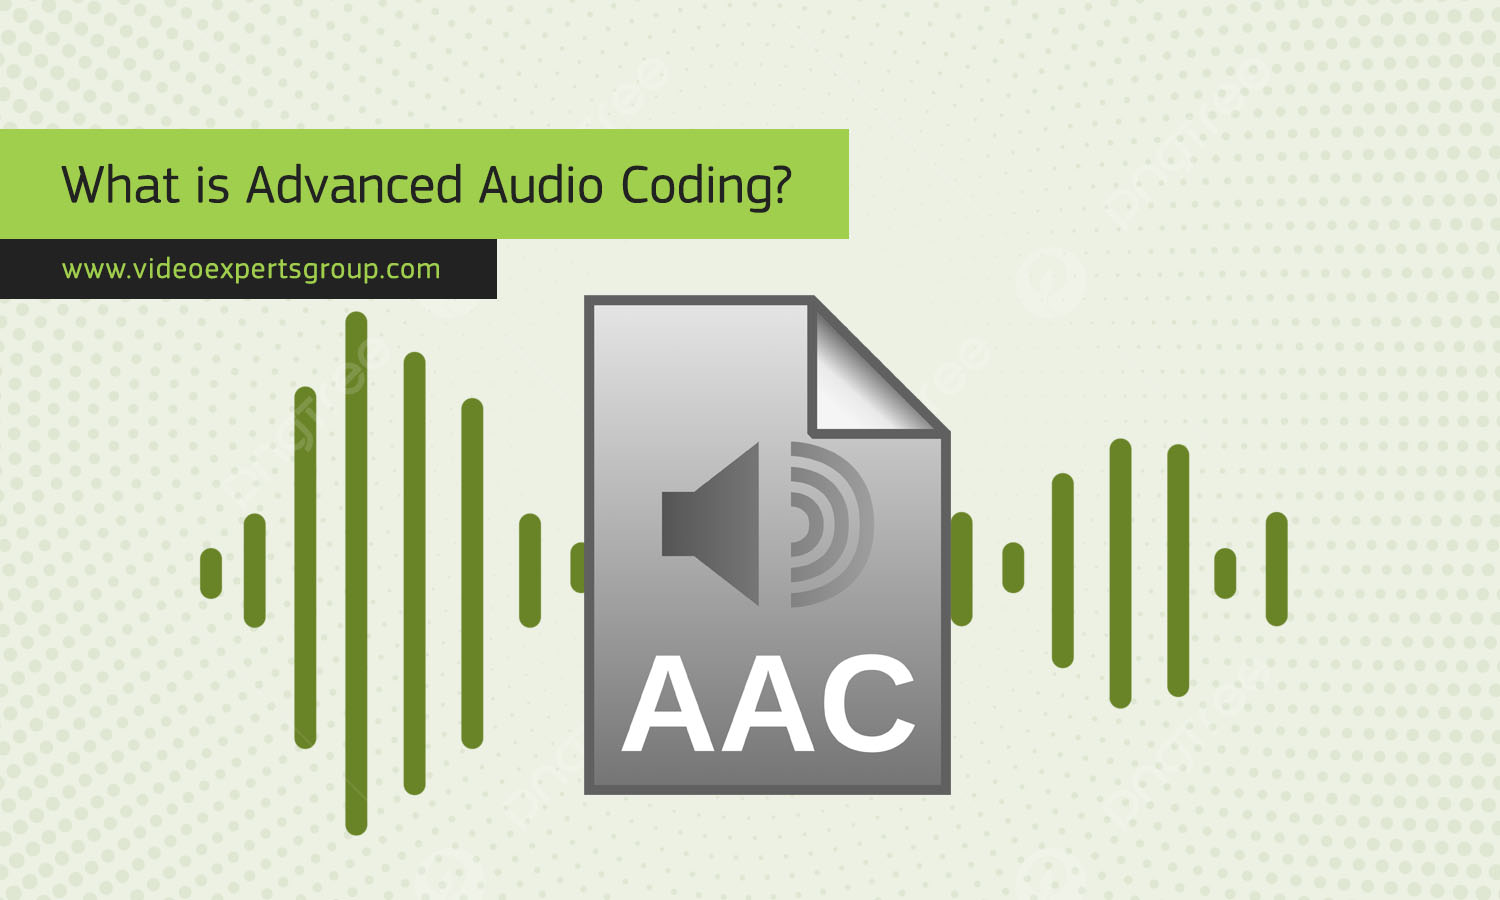 What is Advanced Audio Coding (AAC)?